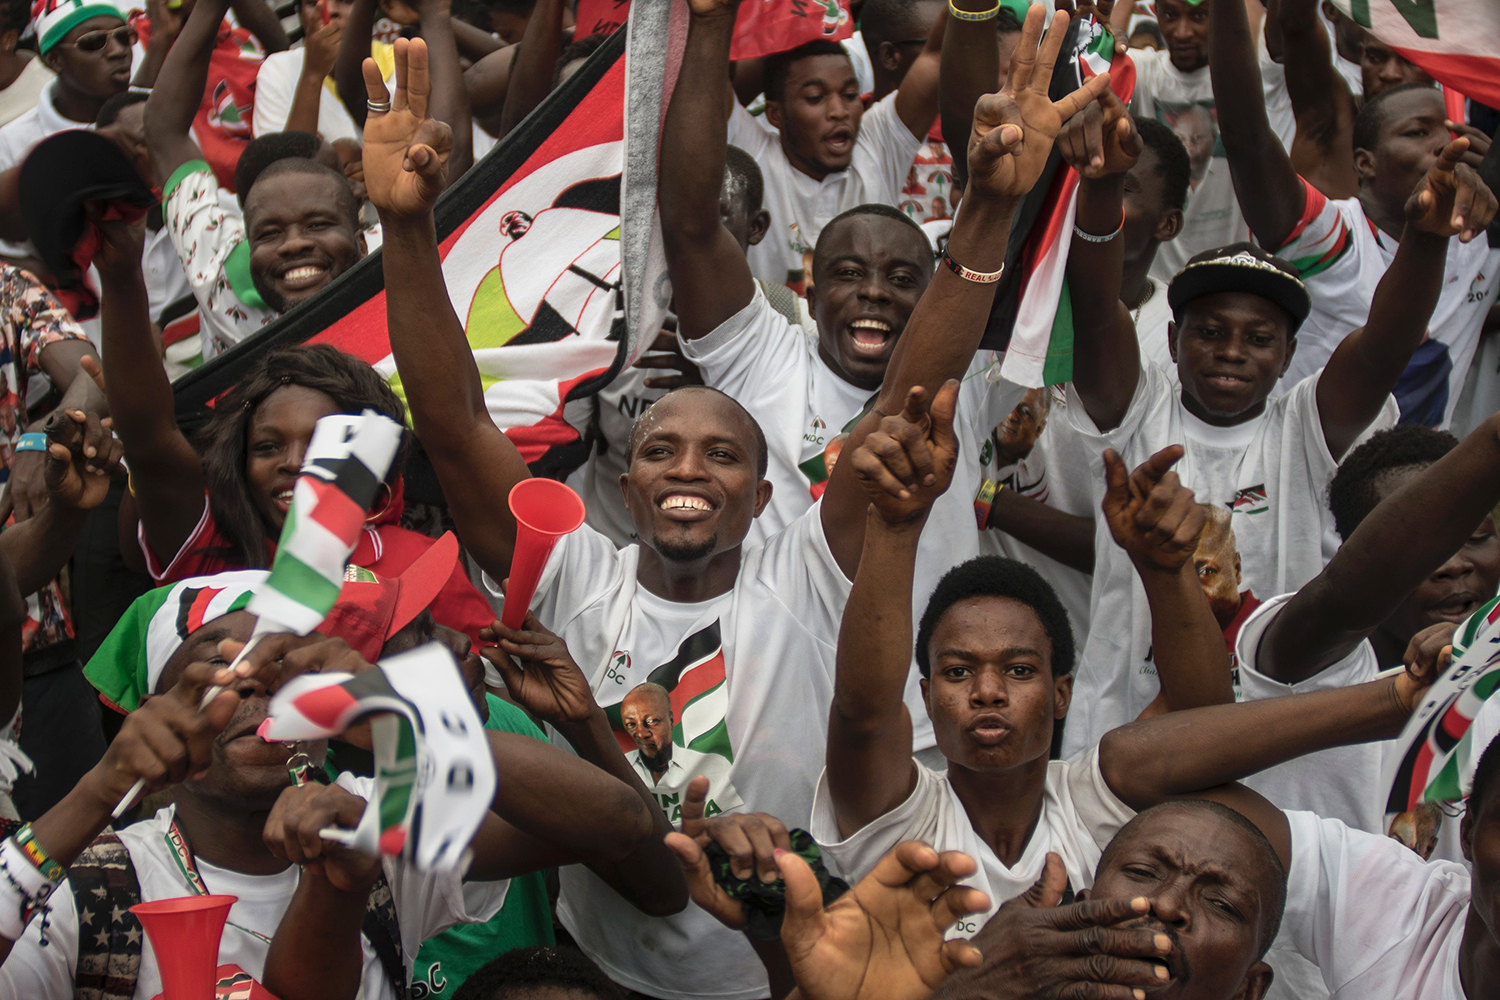 TOPSHOT - Supporters of the NDC (National Democratic Congress) party attend in the Accra Sports Stadium on December 5, 2016, the last NDC rally before the December 7 presidential elections. Fears about the erosion of Ghana's democracy have dominated the presidential campaign, with claims of voter intimidation and questions over independence of the Electoral Commission. / AFP PHOTO / CRISTINA ALDEHUELA / TT / kod 444